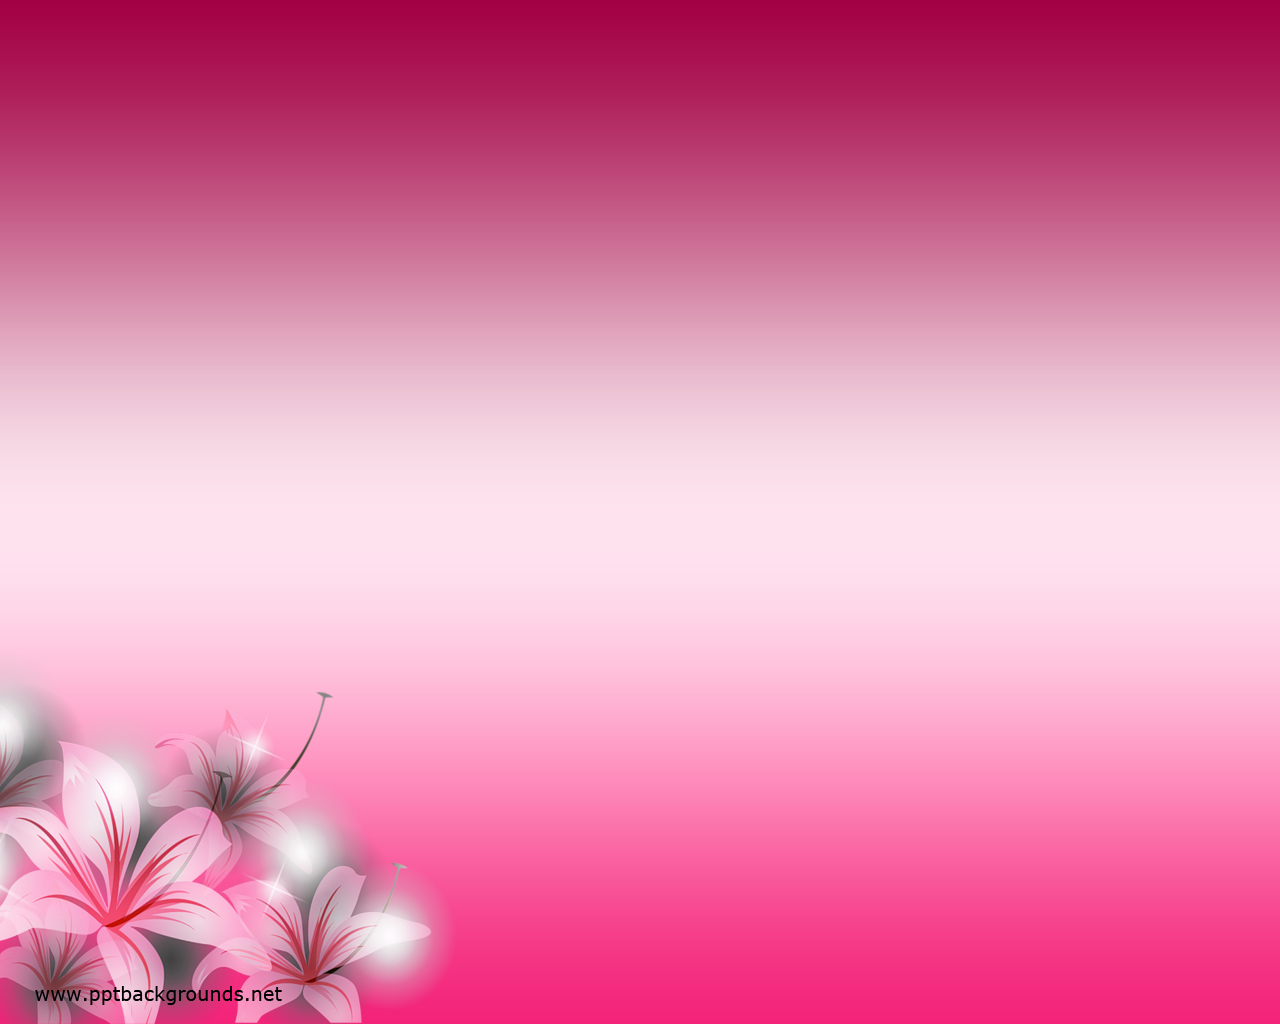 Free Pink Flowers Backgrounds For PowerPoint   Flower PPT Templates